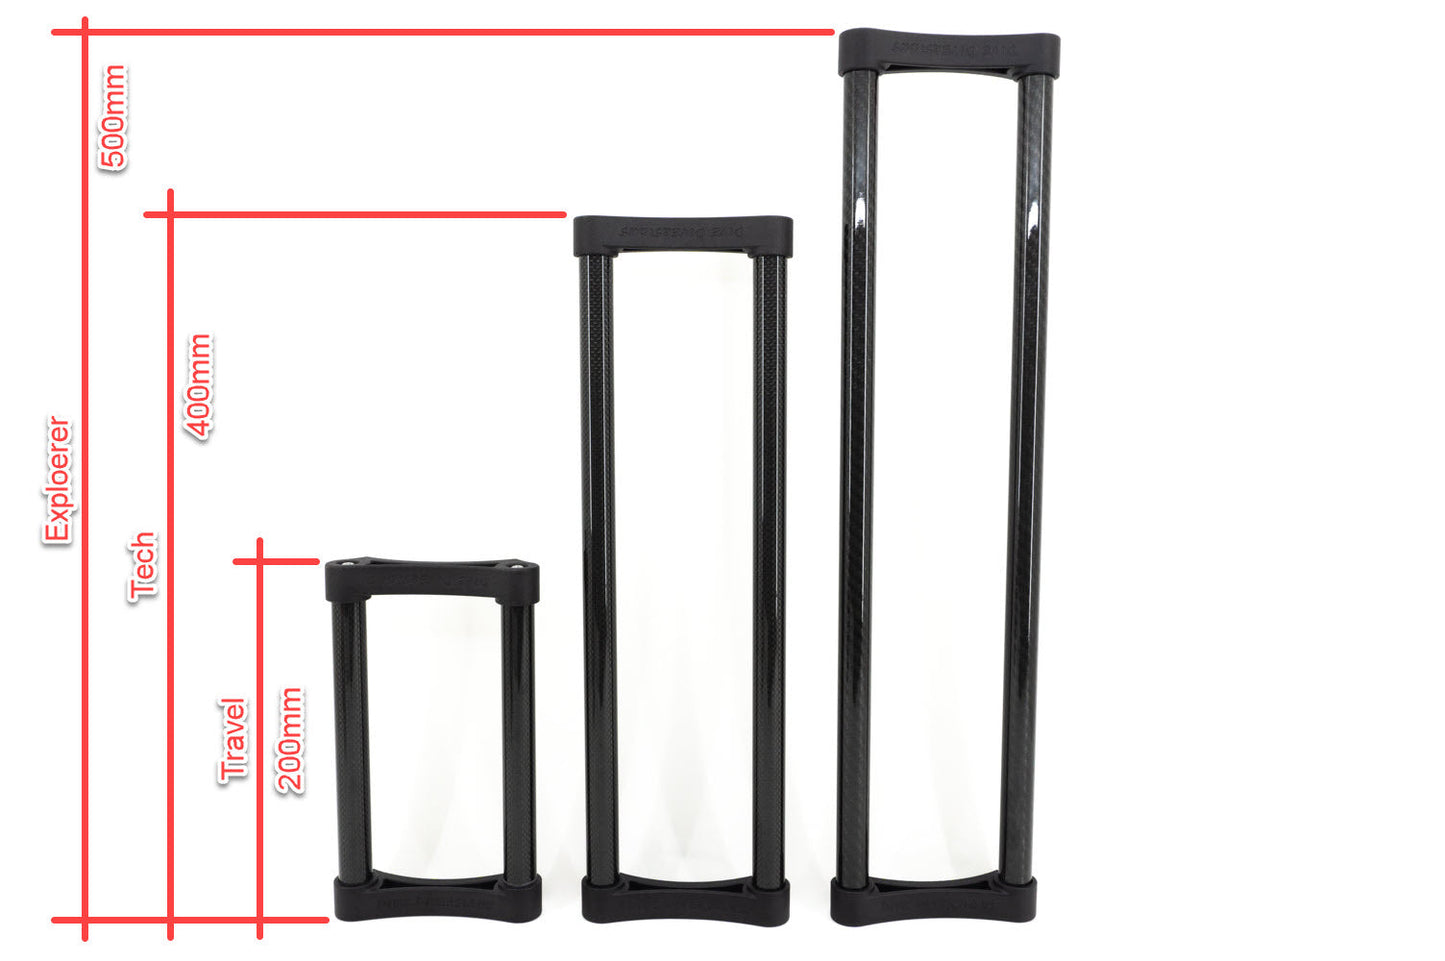 Blacktip rail mount system, image shows the three sizes available, 200mm, 400mm and 5oomm.